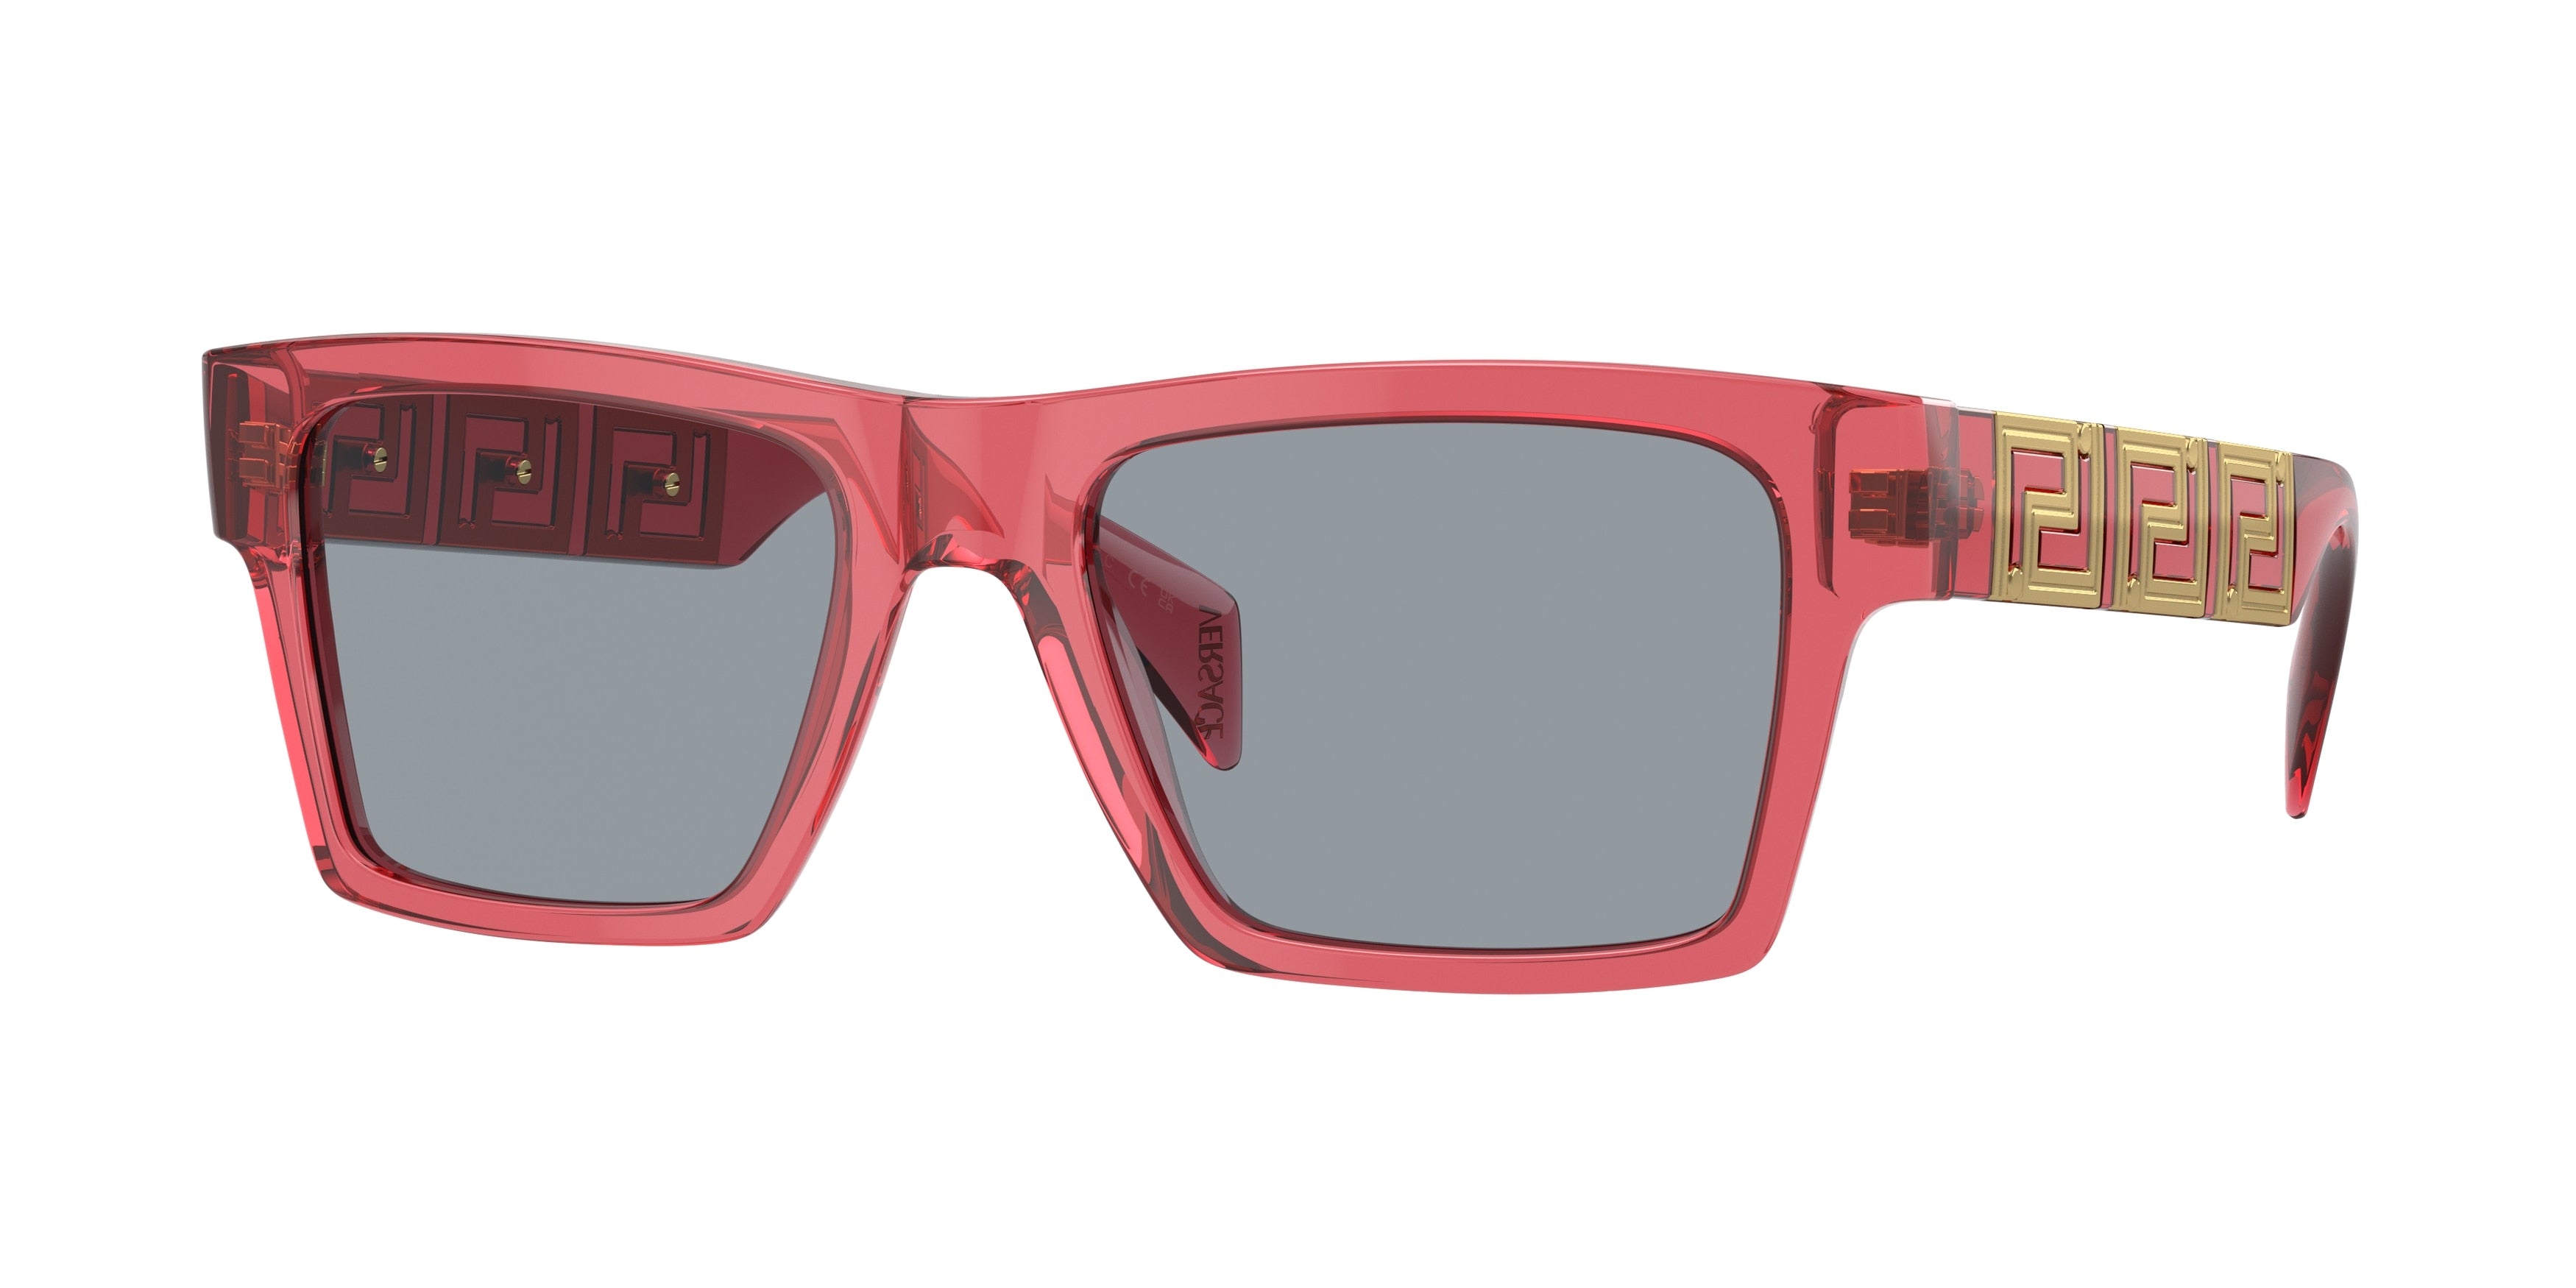 Versace VE4445 Rectangle Sunglasses  5409/1-Transparent Red 54-145-19 - Color Map Red